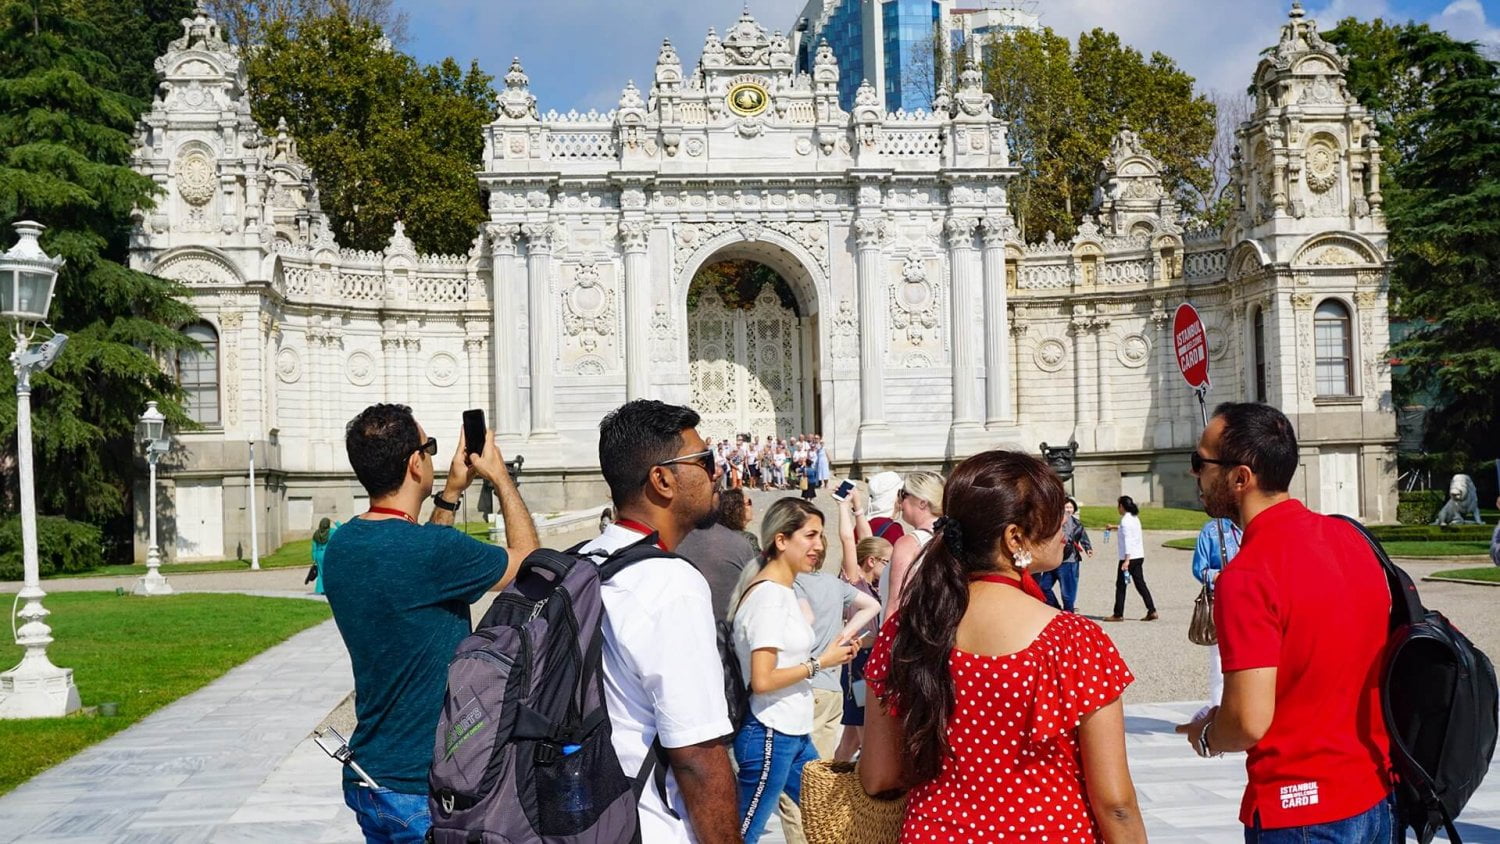 Dolmabahce Palace Museum (2023 Tickets, Skip the Lines, Insider Guide)